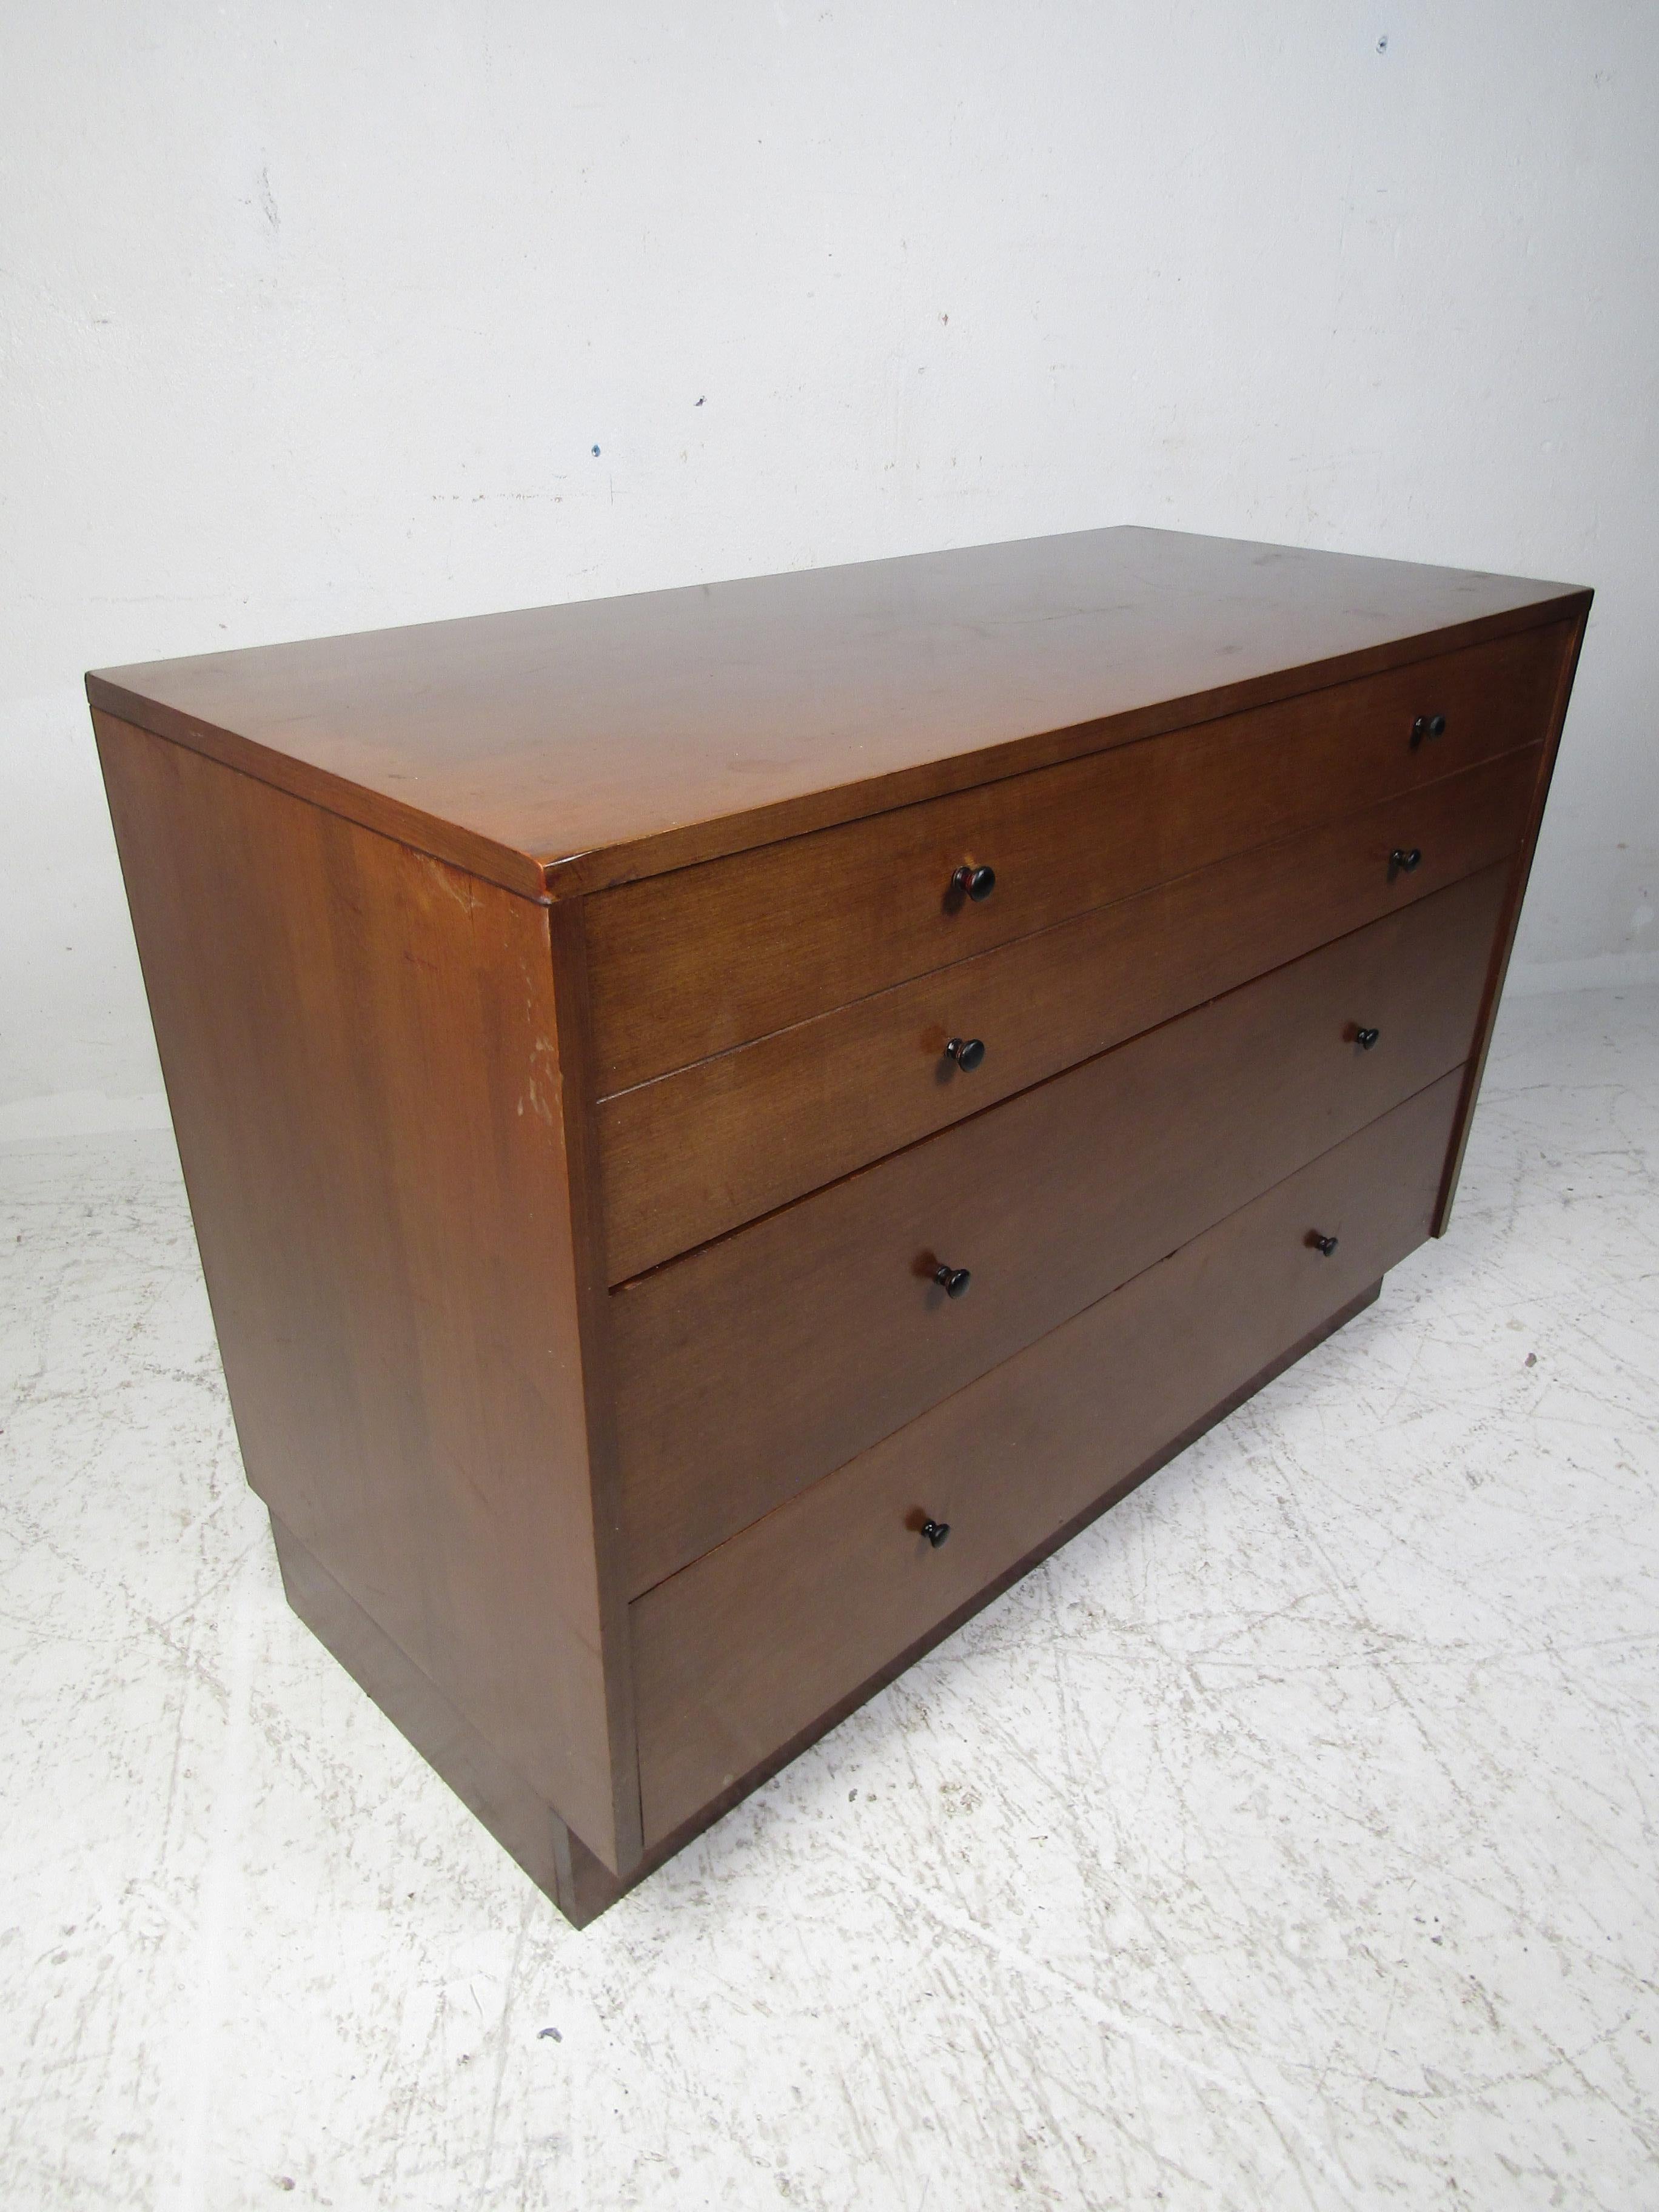 This stunning vintage modern chest offers plenty of room for storage within its four hefty drawers. A straight line design with beautiful walnut wood grain and sculpted drawer pulls. This chest makes the perfect addition to any modern interior.